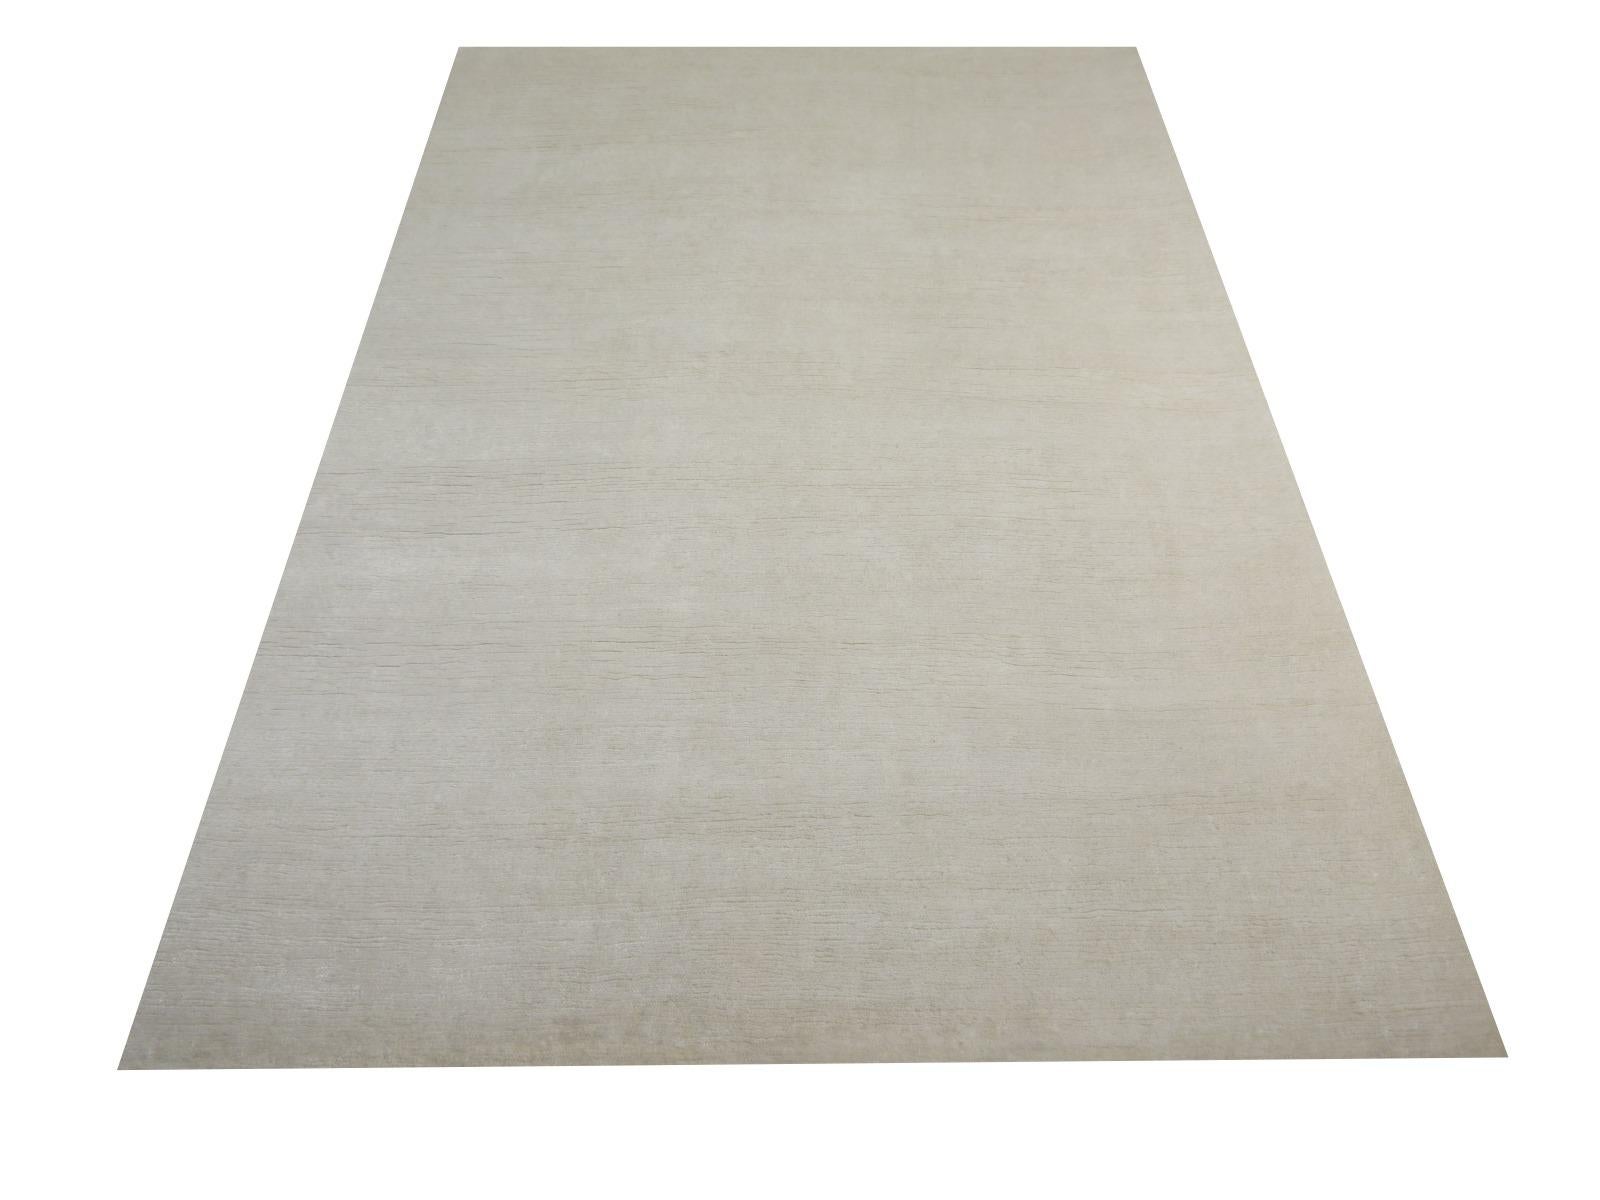 Perfect Plain Rug Collection color white ivory in bamboo silk by Djoharian Design

This contemporary plain rug design from the Djoharian Collection is hand knotted in extra fine 100 knot per square inch quality, all made of hand spun bamboo silk.